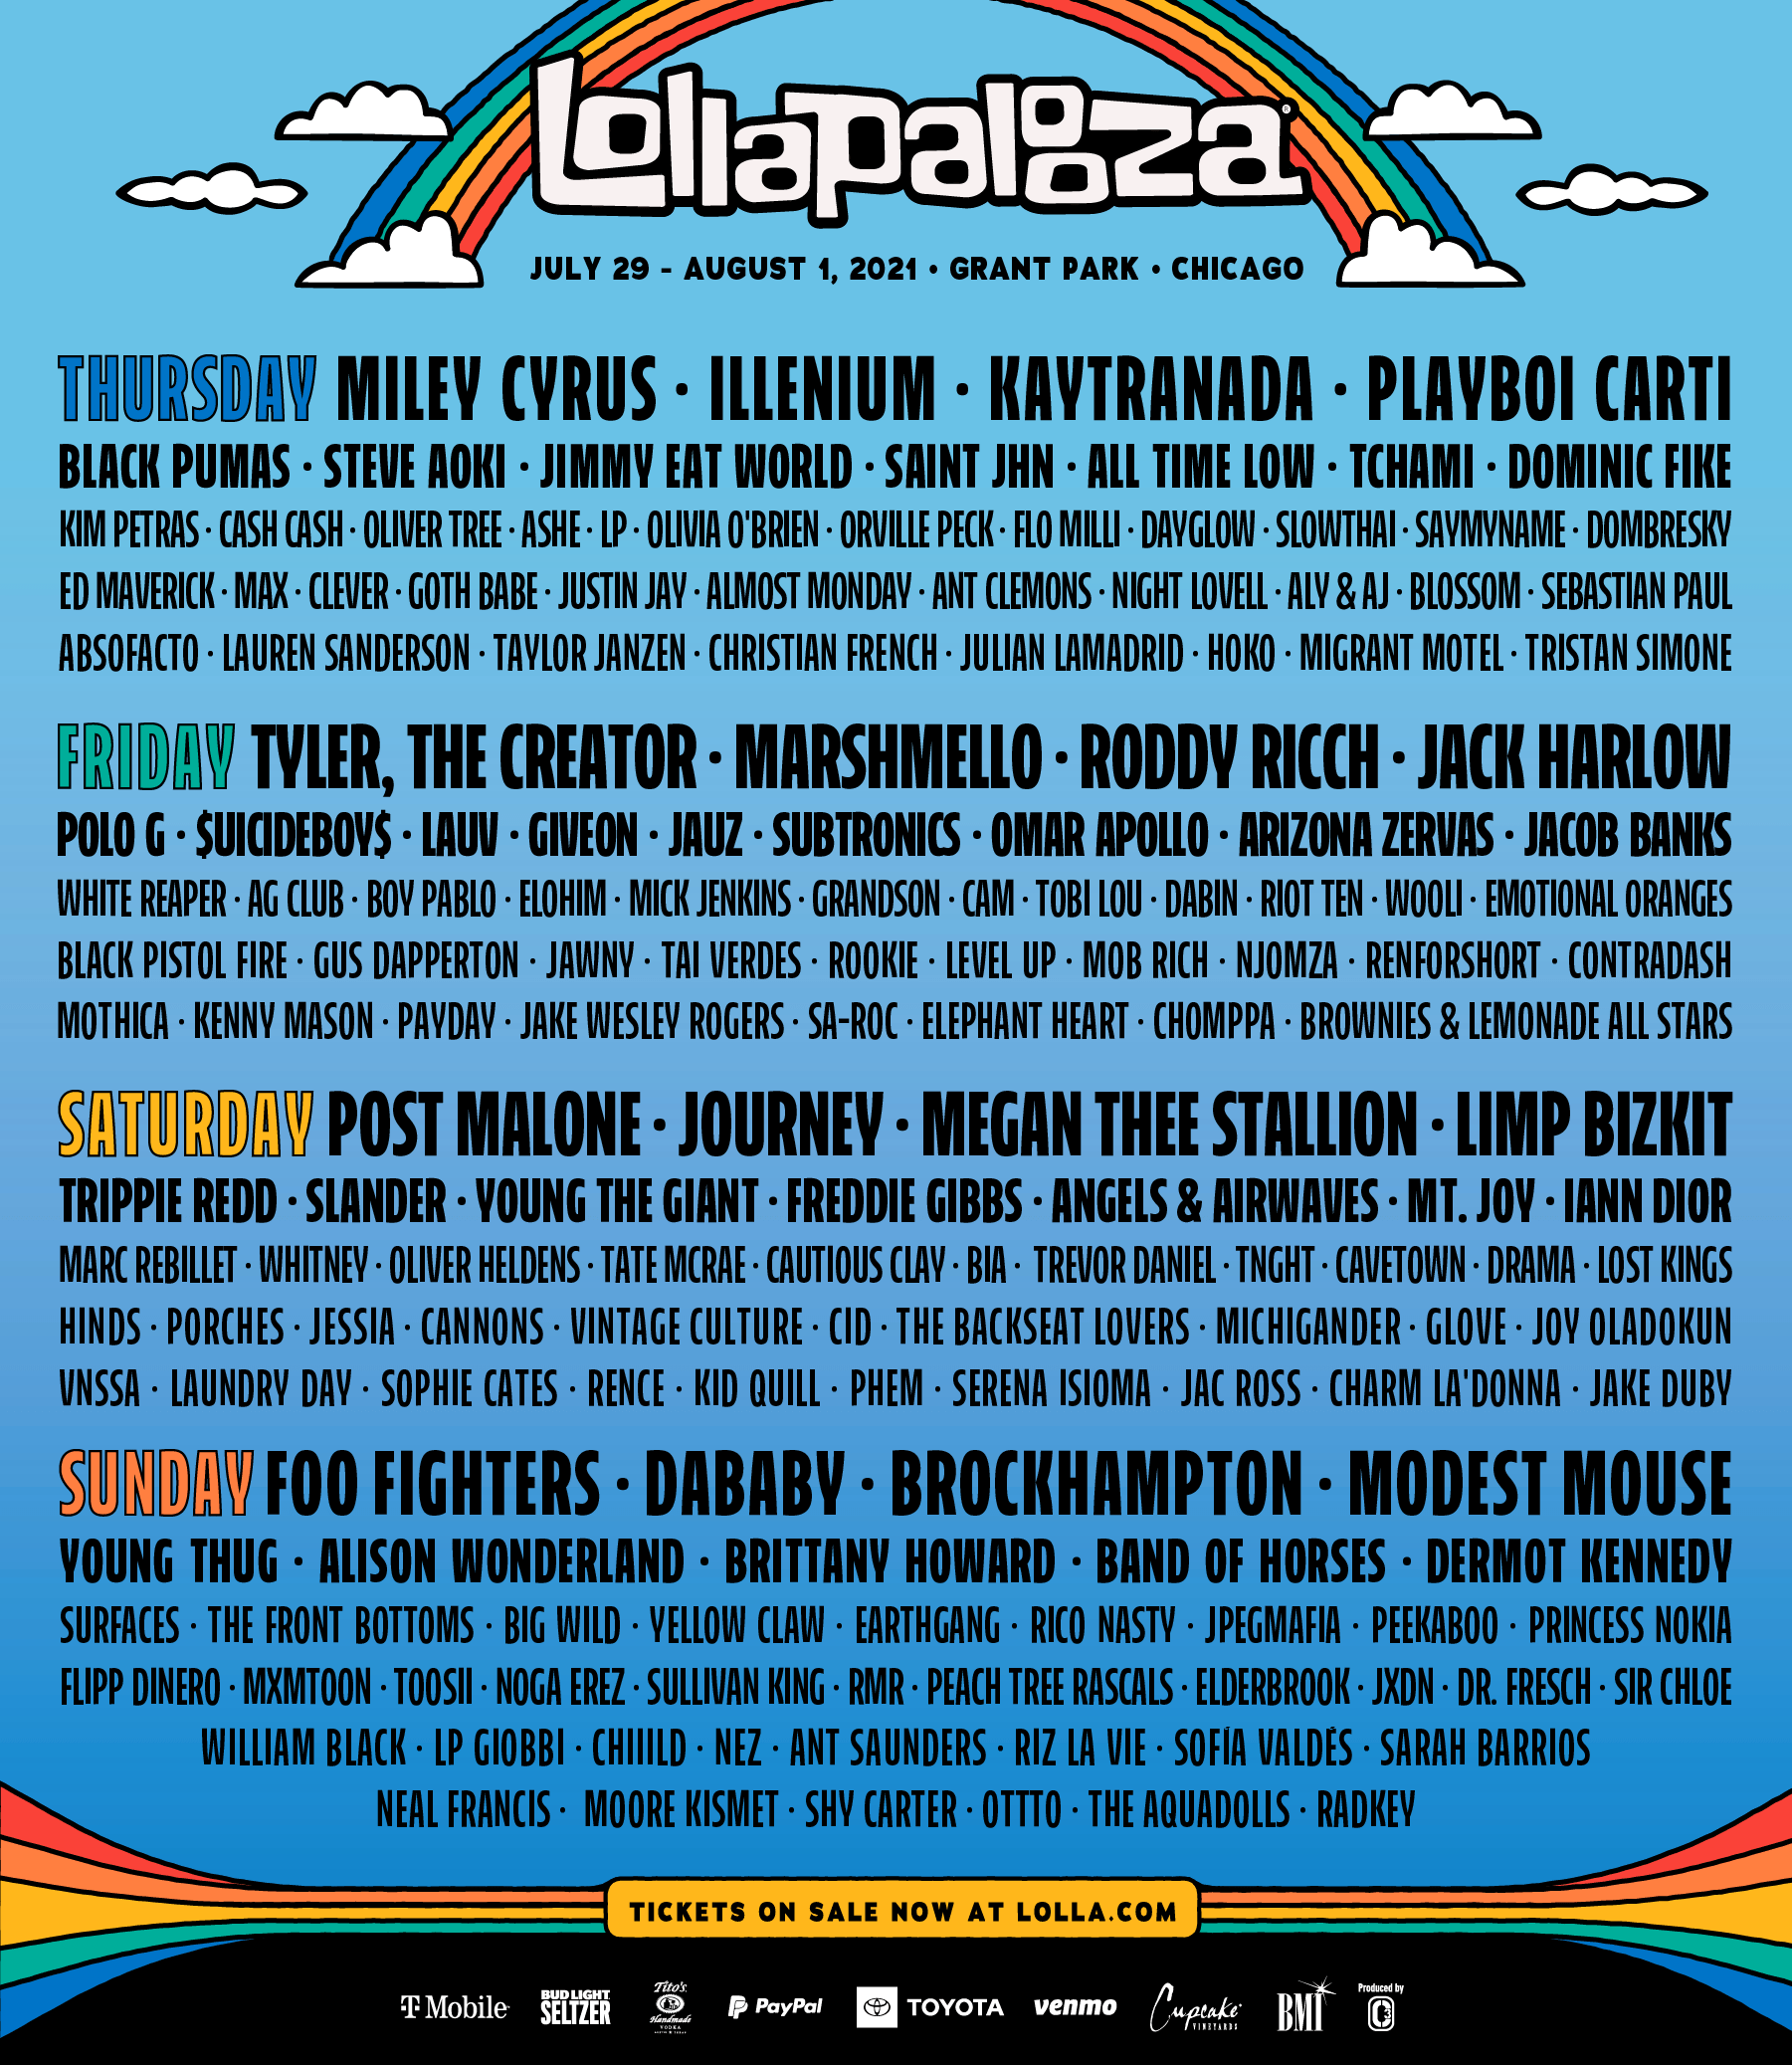 Lollapalooza Announce 2021 Lineup By Day Plus 1-Day Tickets! 2